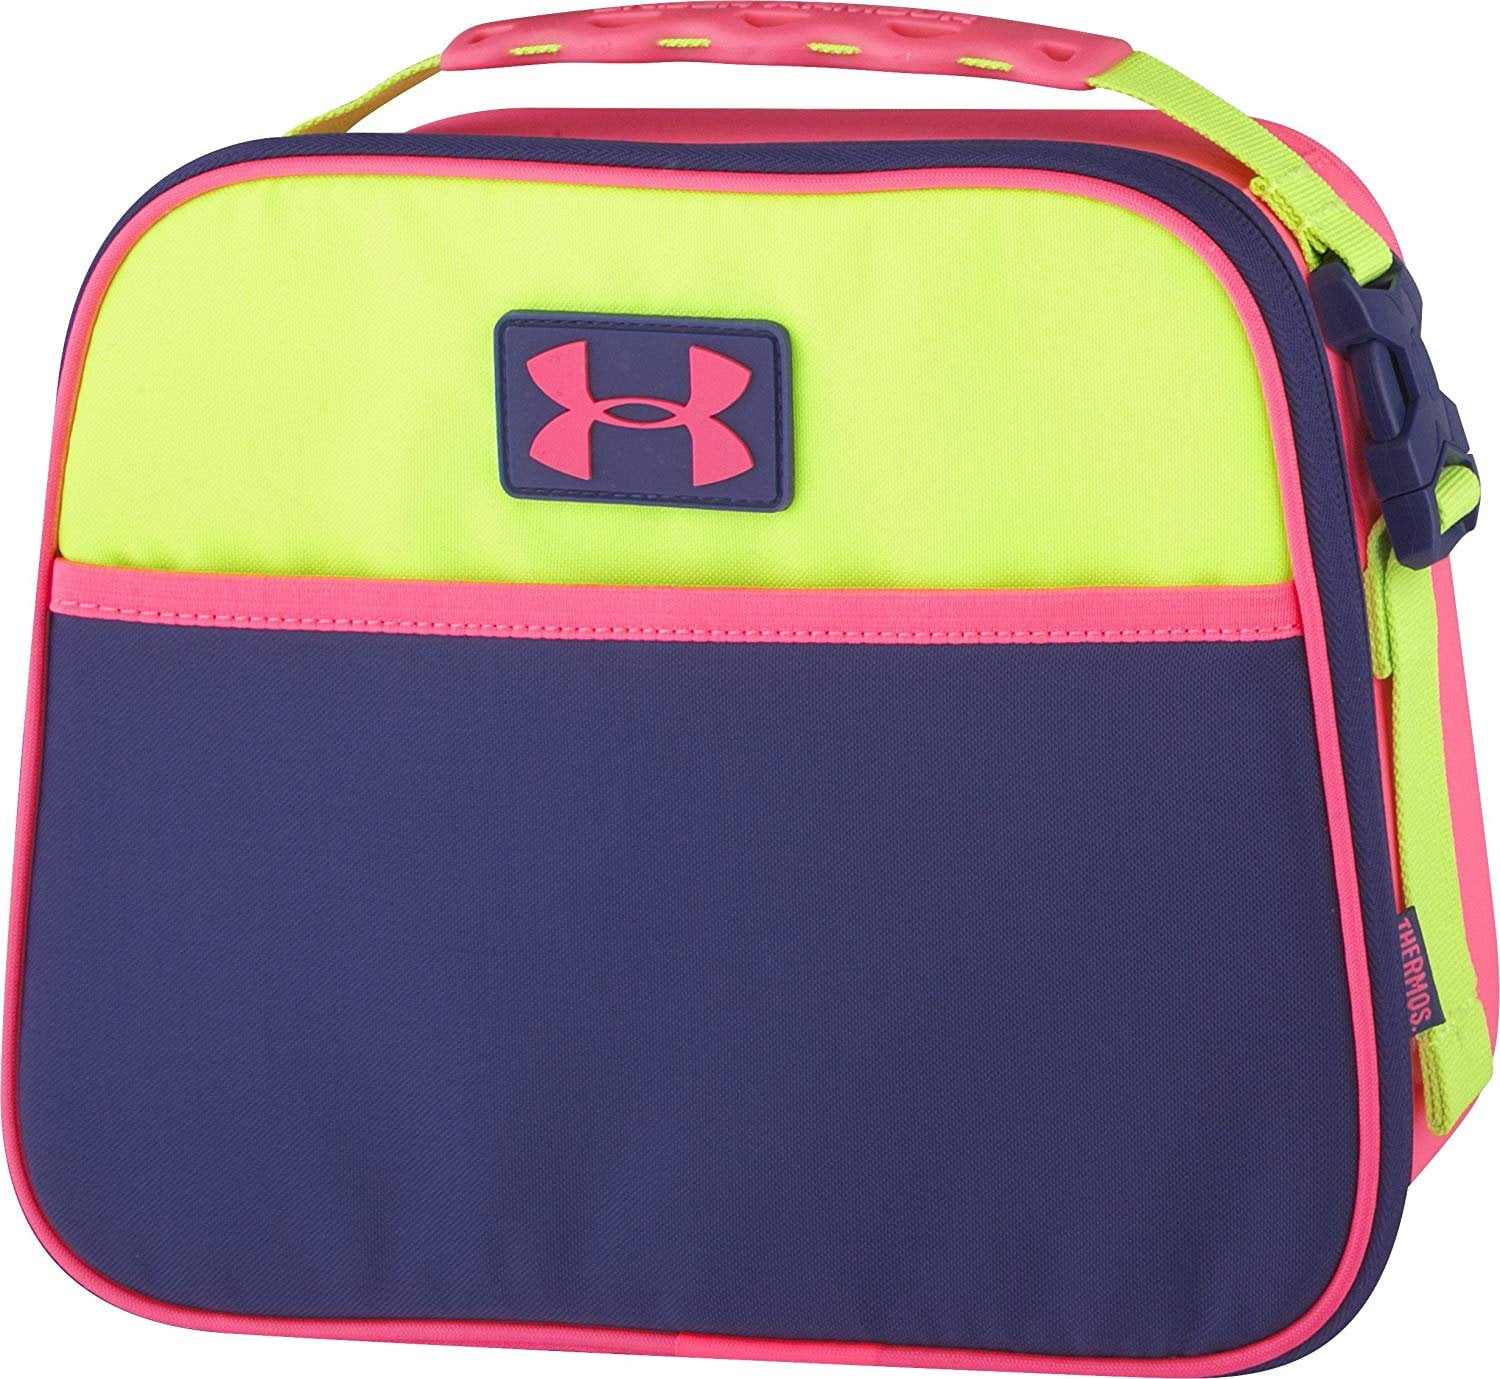 Under Armour Scrimmage Lunch Box, Optic Purple 